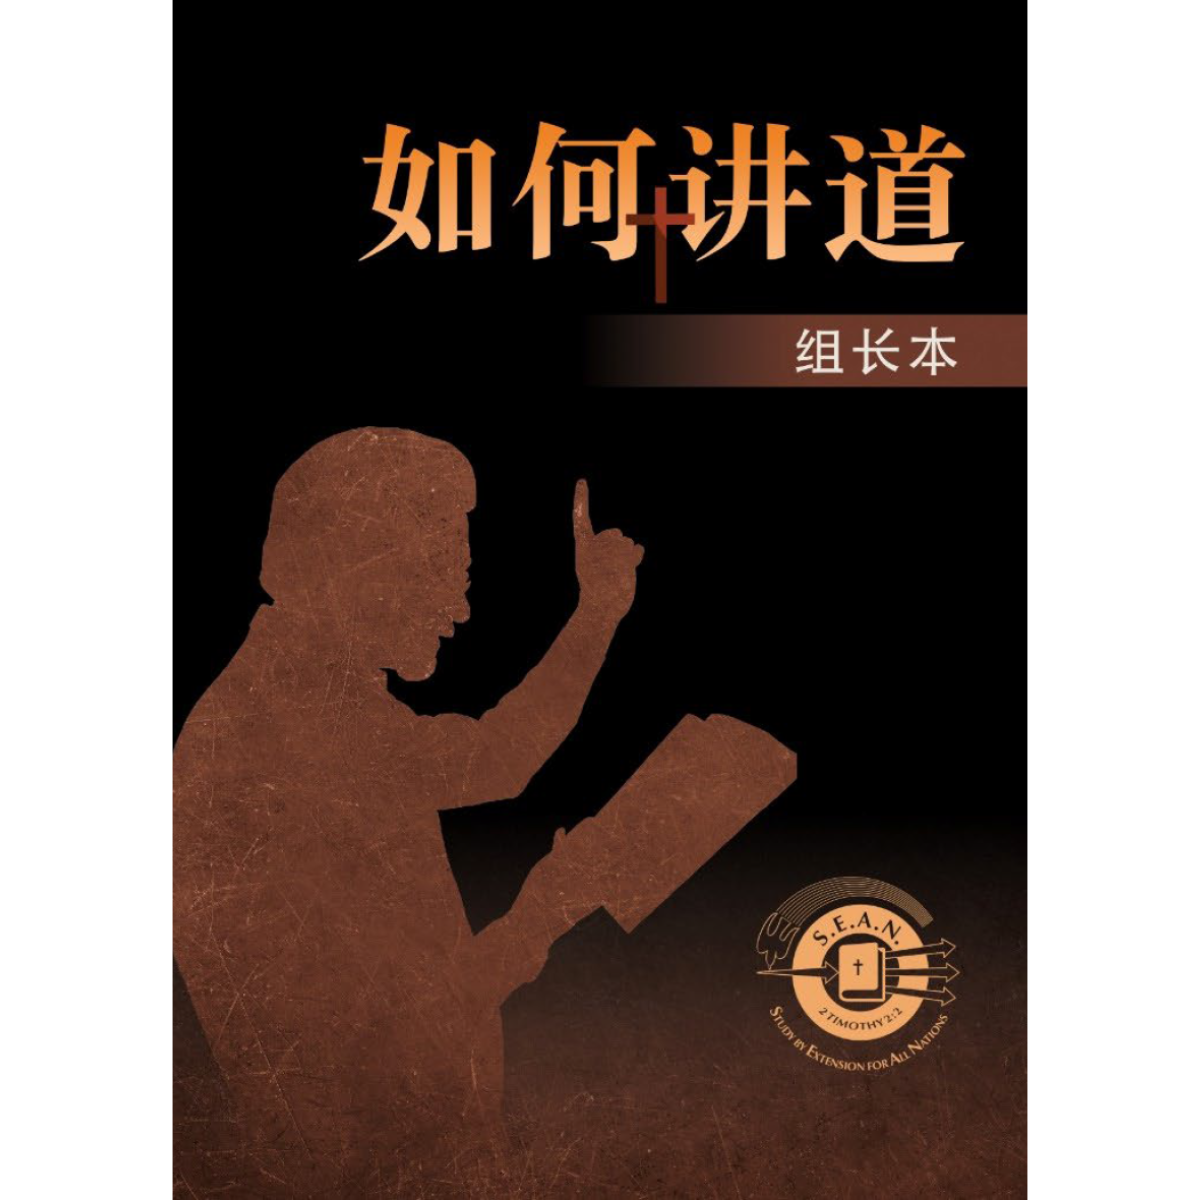 How to Preach - Leader's Guide (Chinese Simplified)